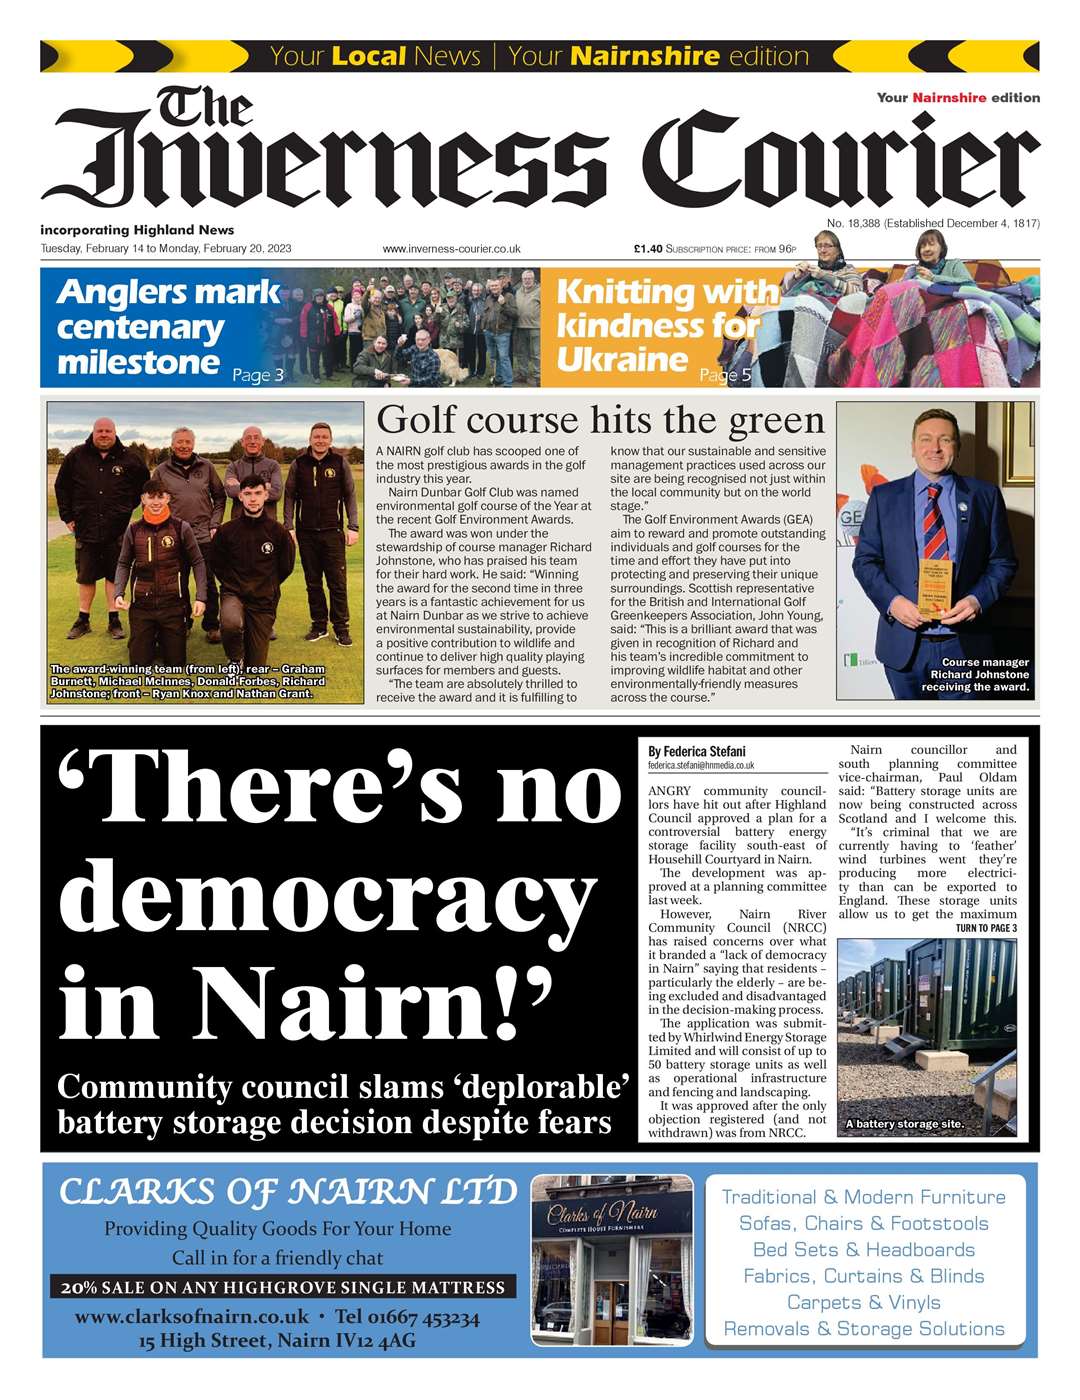 The Inverness Courier (Nairnshire edition), February 14, front page.